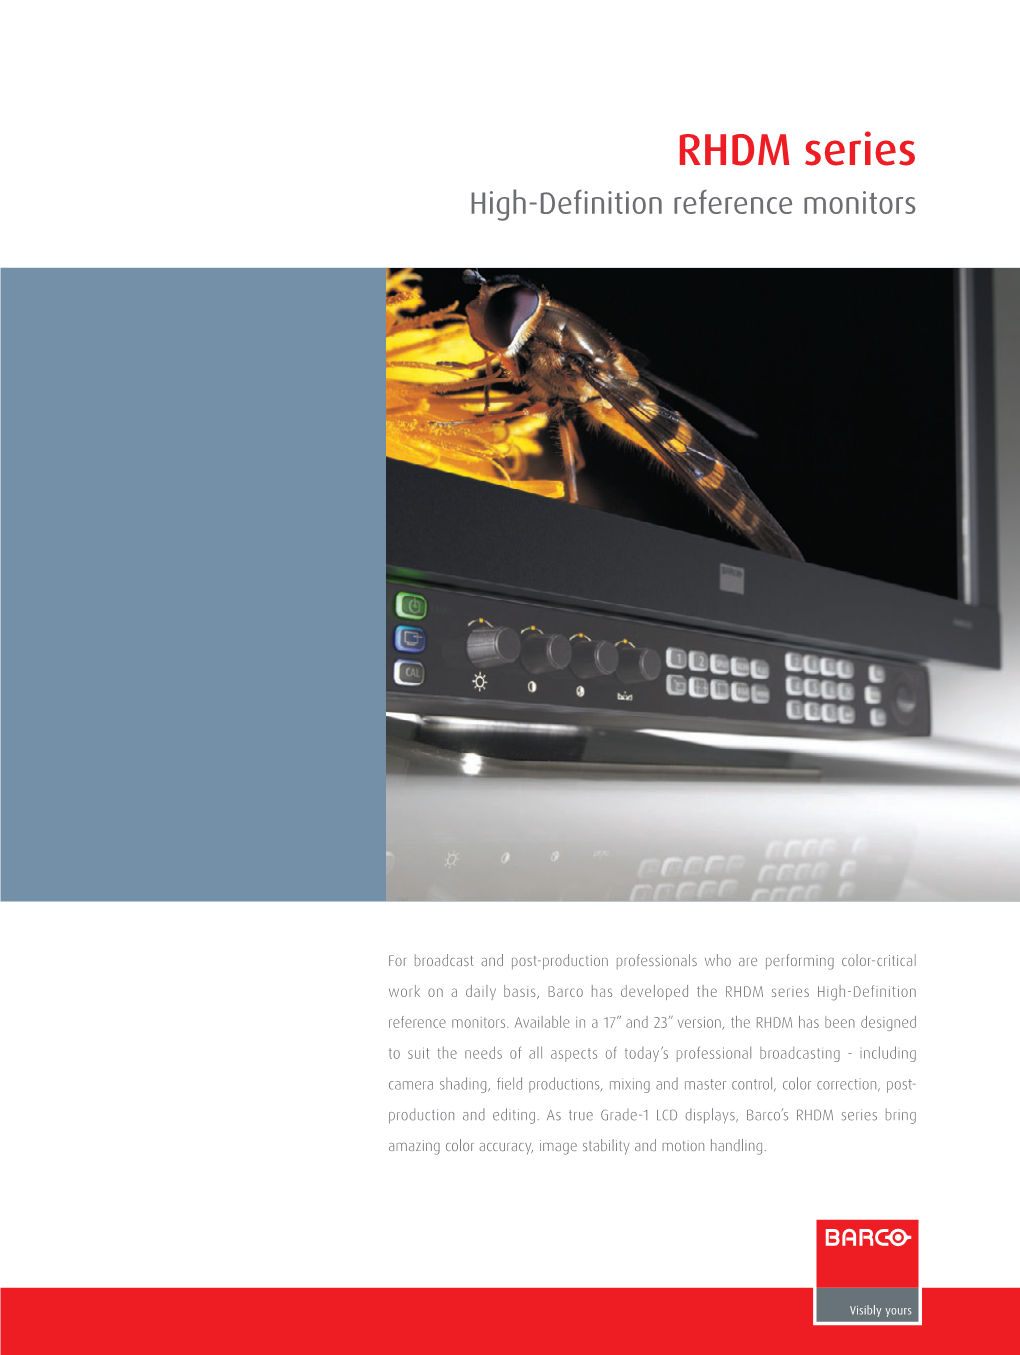 RHDM Series High-Definition Reference Monitors